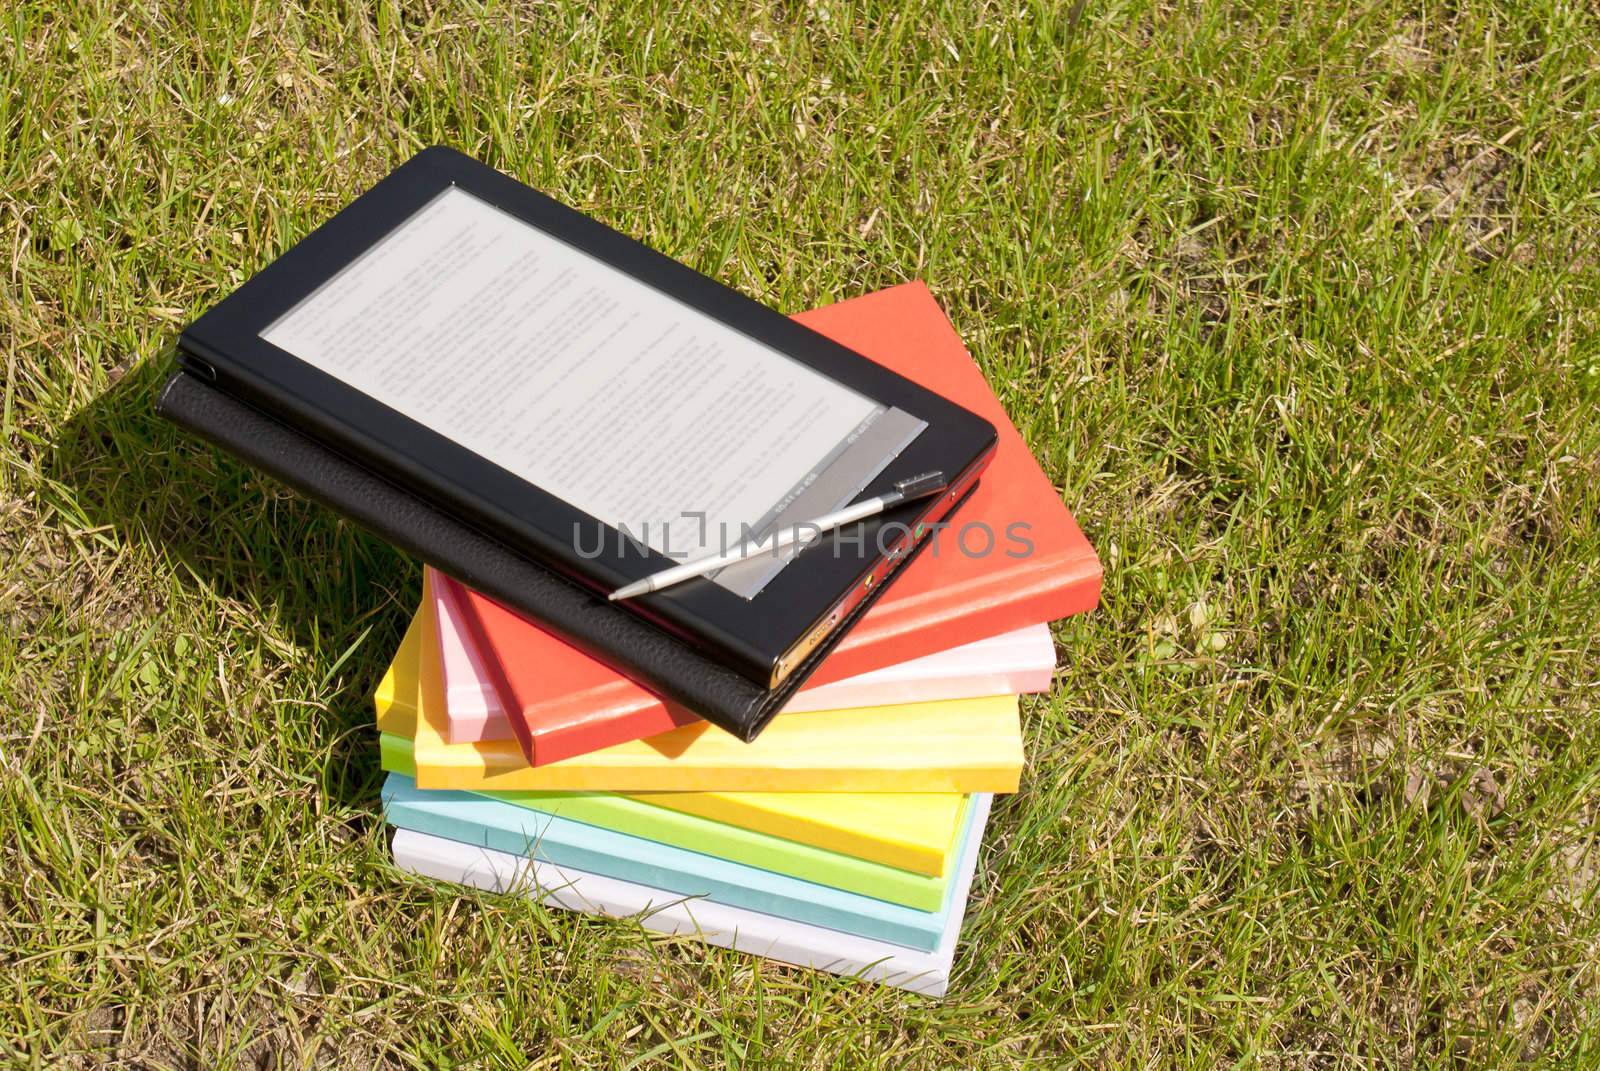 Ebook reader with a stack of books by AndreyKr